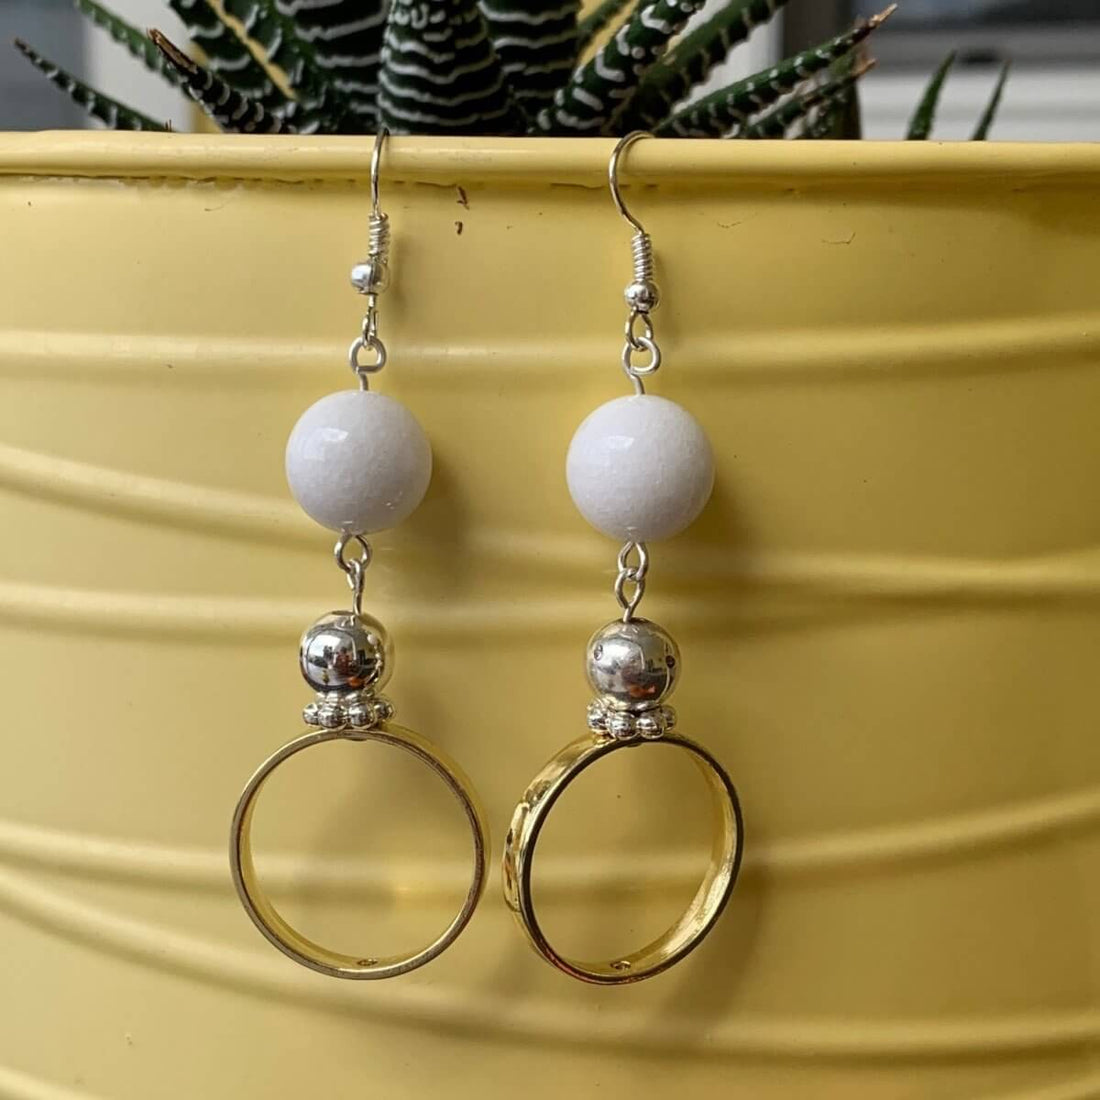 Earrings made of White Jade Rounds with gold & silver accents